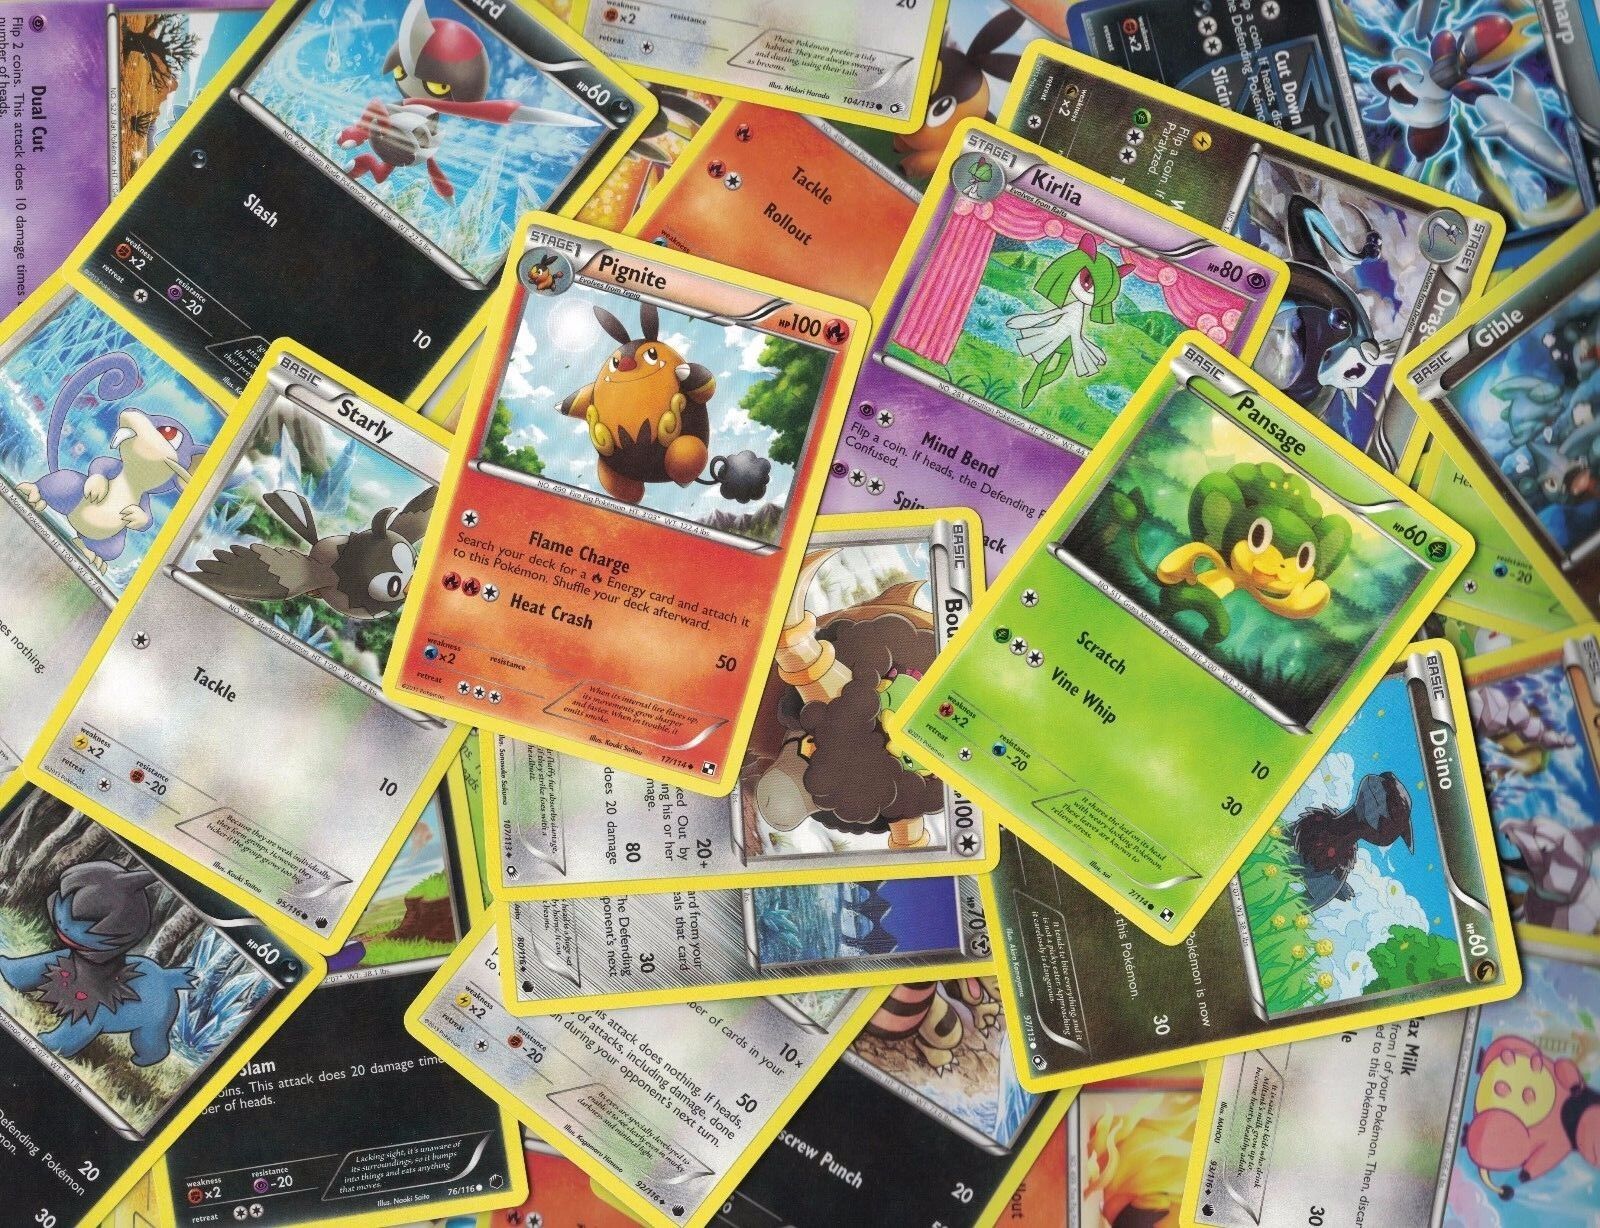 BEST SELLER Lot of 40 REAL Pokemon Cards Common/Uncommon Excellent-LP Cond Bulk